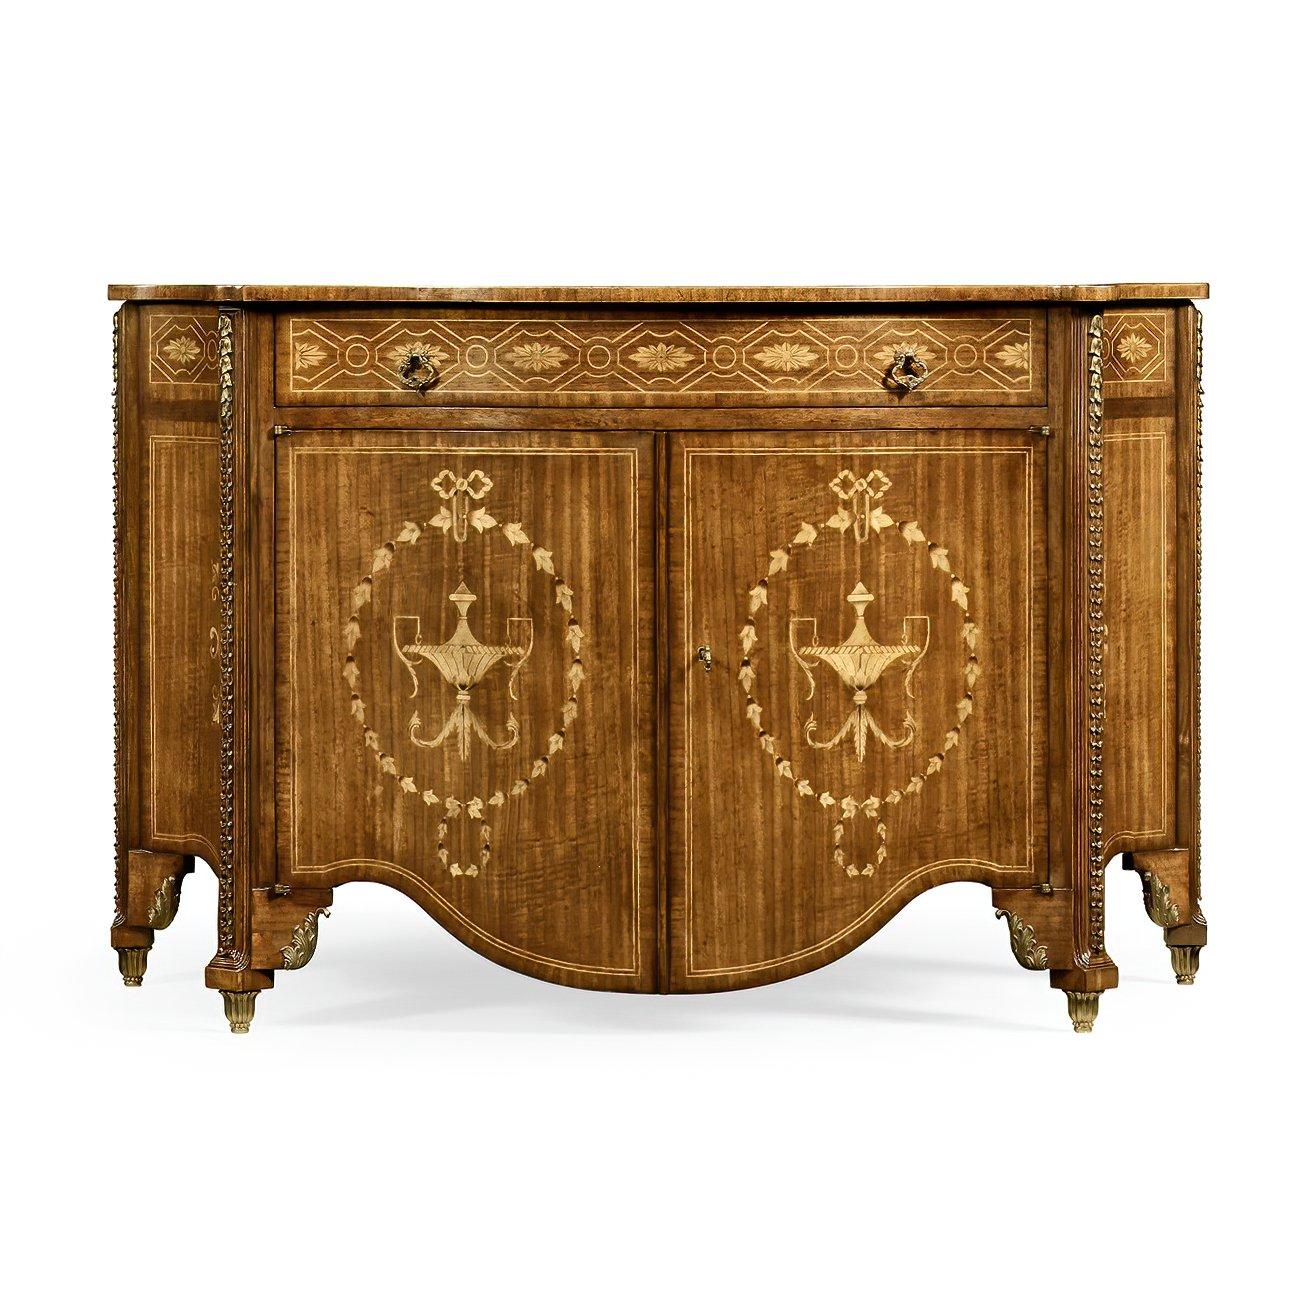 Spectacular crossbanded and marquetry inlaid chest of drawers with fine carved detail and cast brass mounts after a Thomas Chippendale original, the detailed serpentine doors opening to reveal three further graduated drawers within. After an